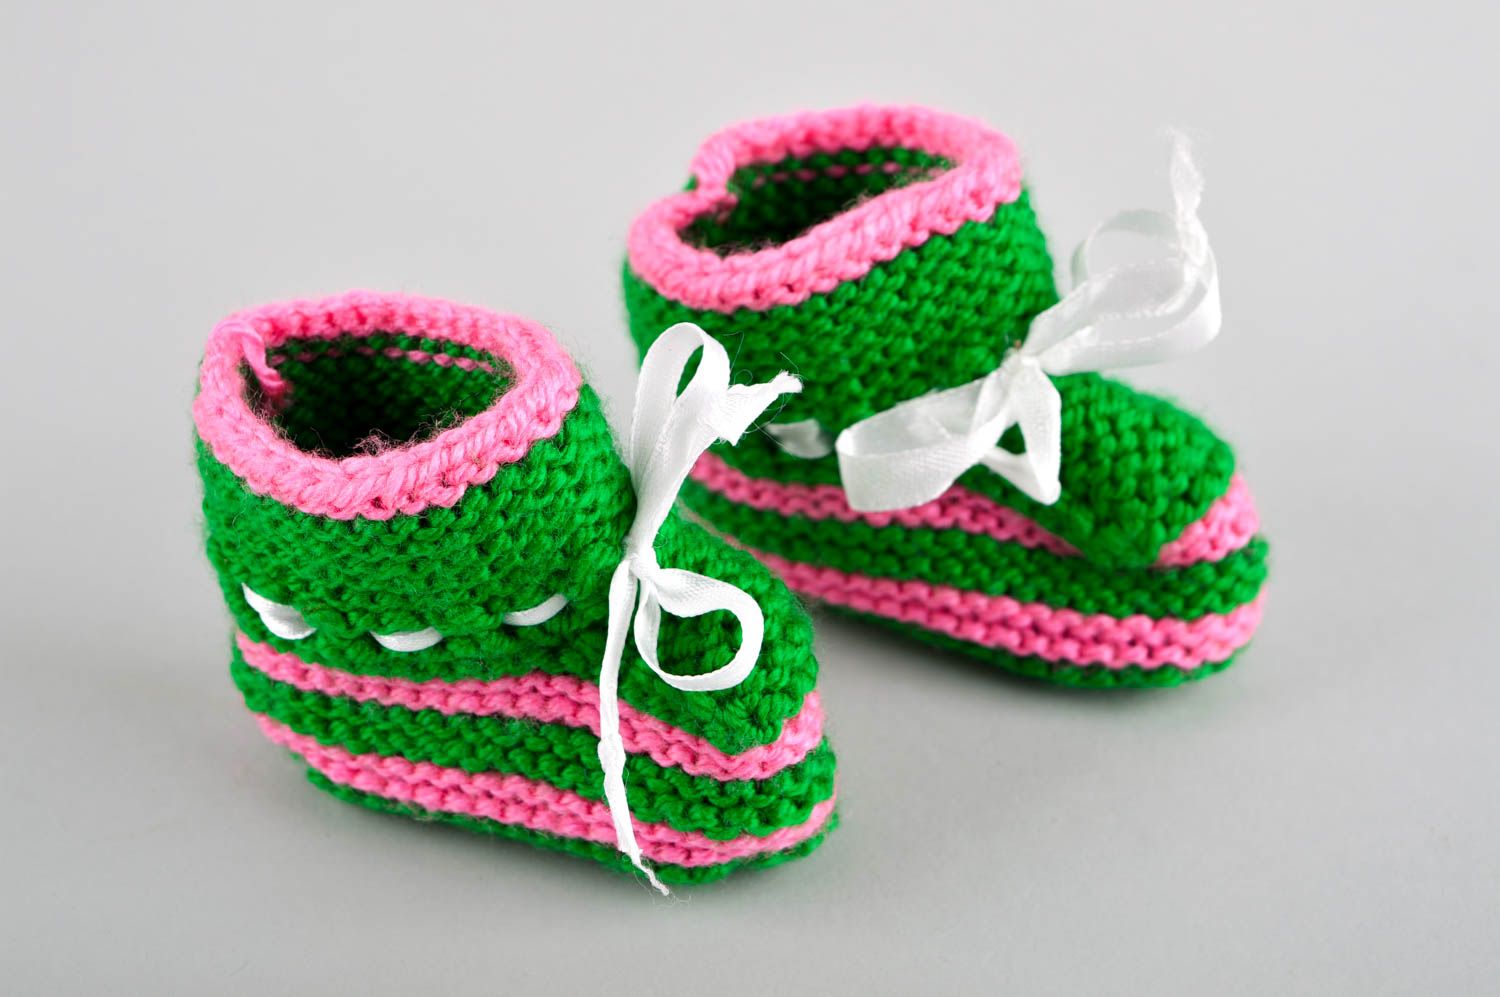 Handmade baby shoes crochet baby shoes baby socks goods for children kids gifts photo 3